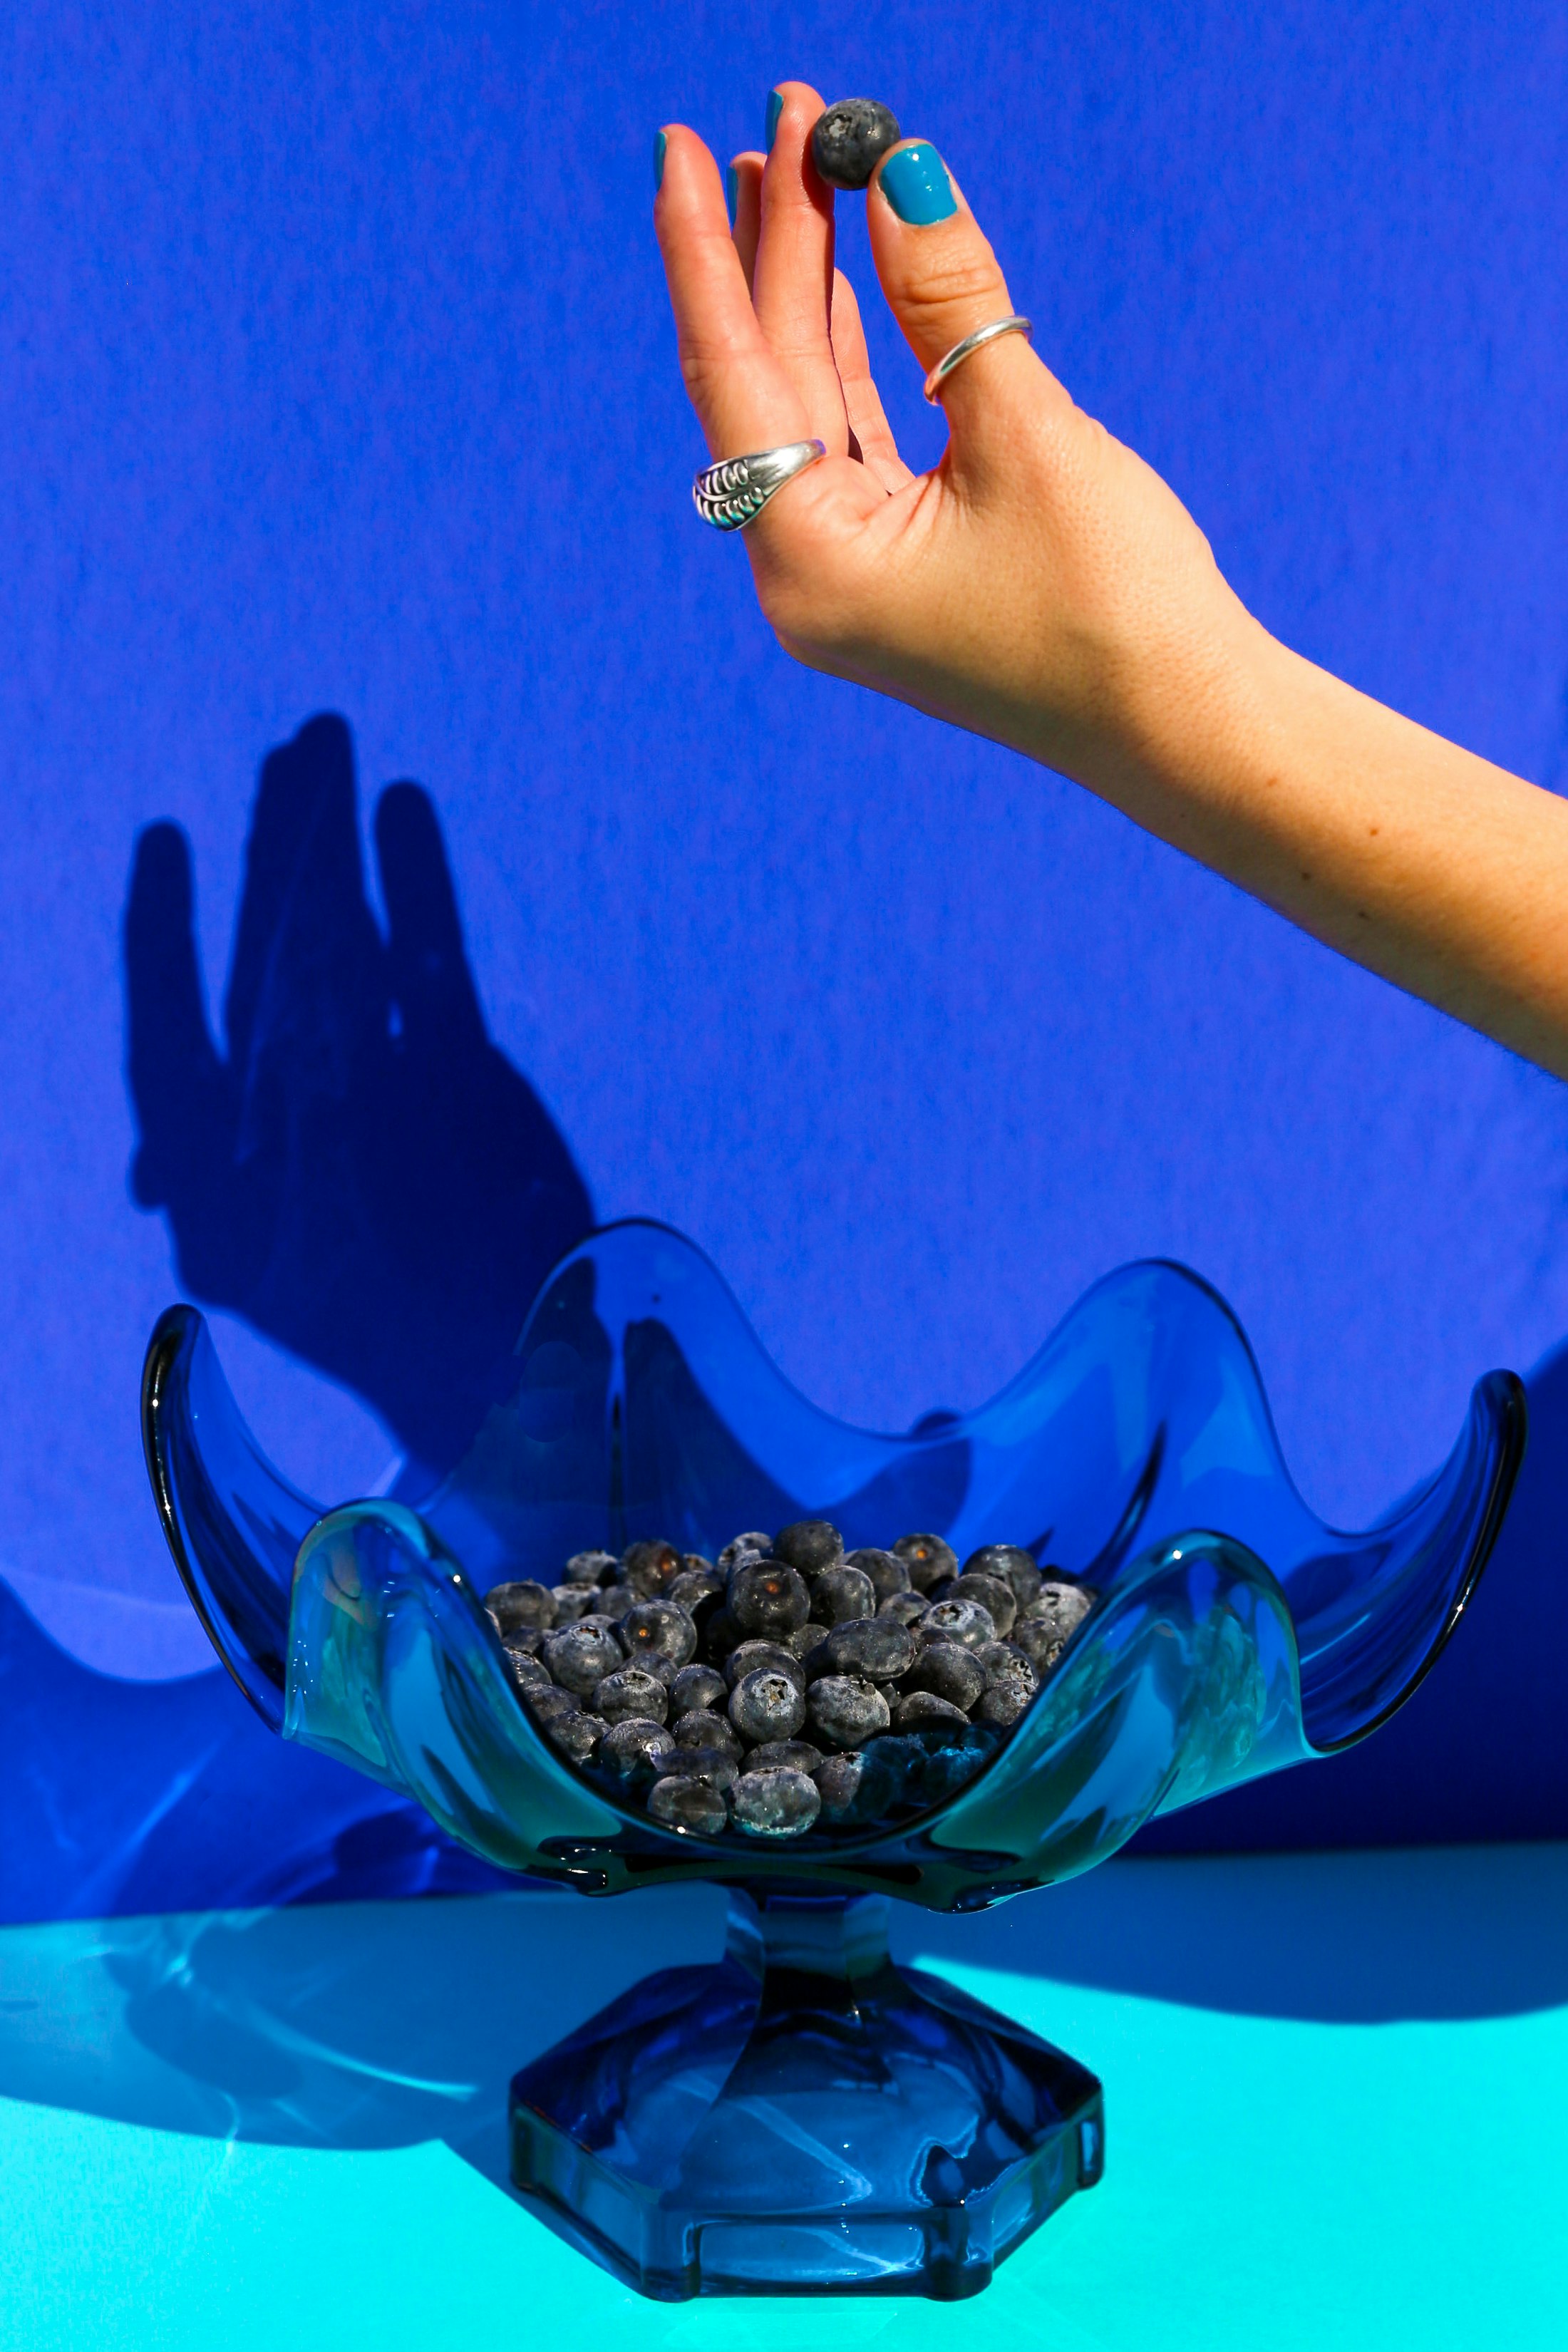 person holding black beans on blue plastic container